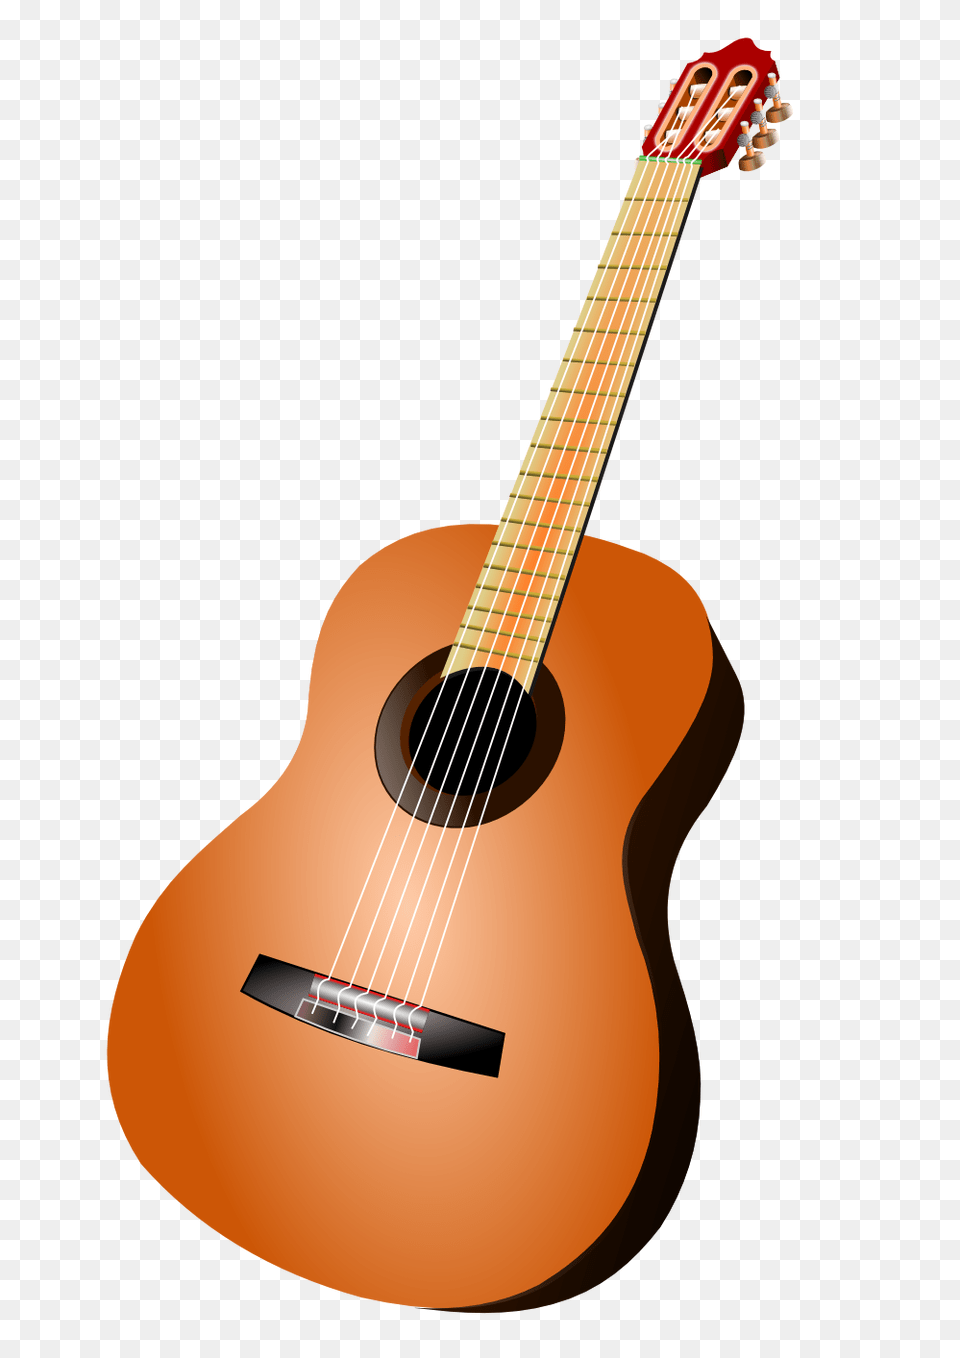 Guitar Free Picture Download, Musical Instrument, Bass Guitar Png